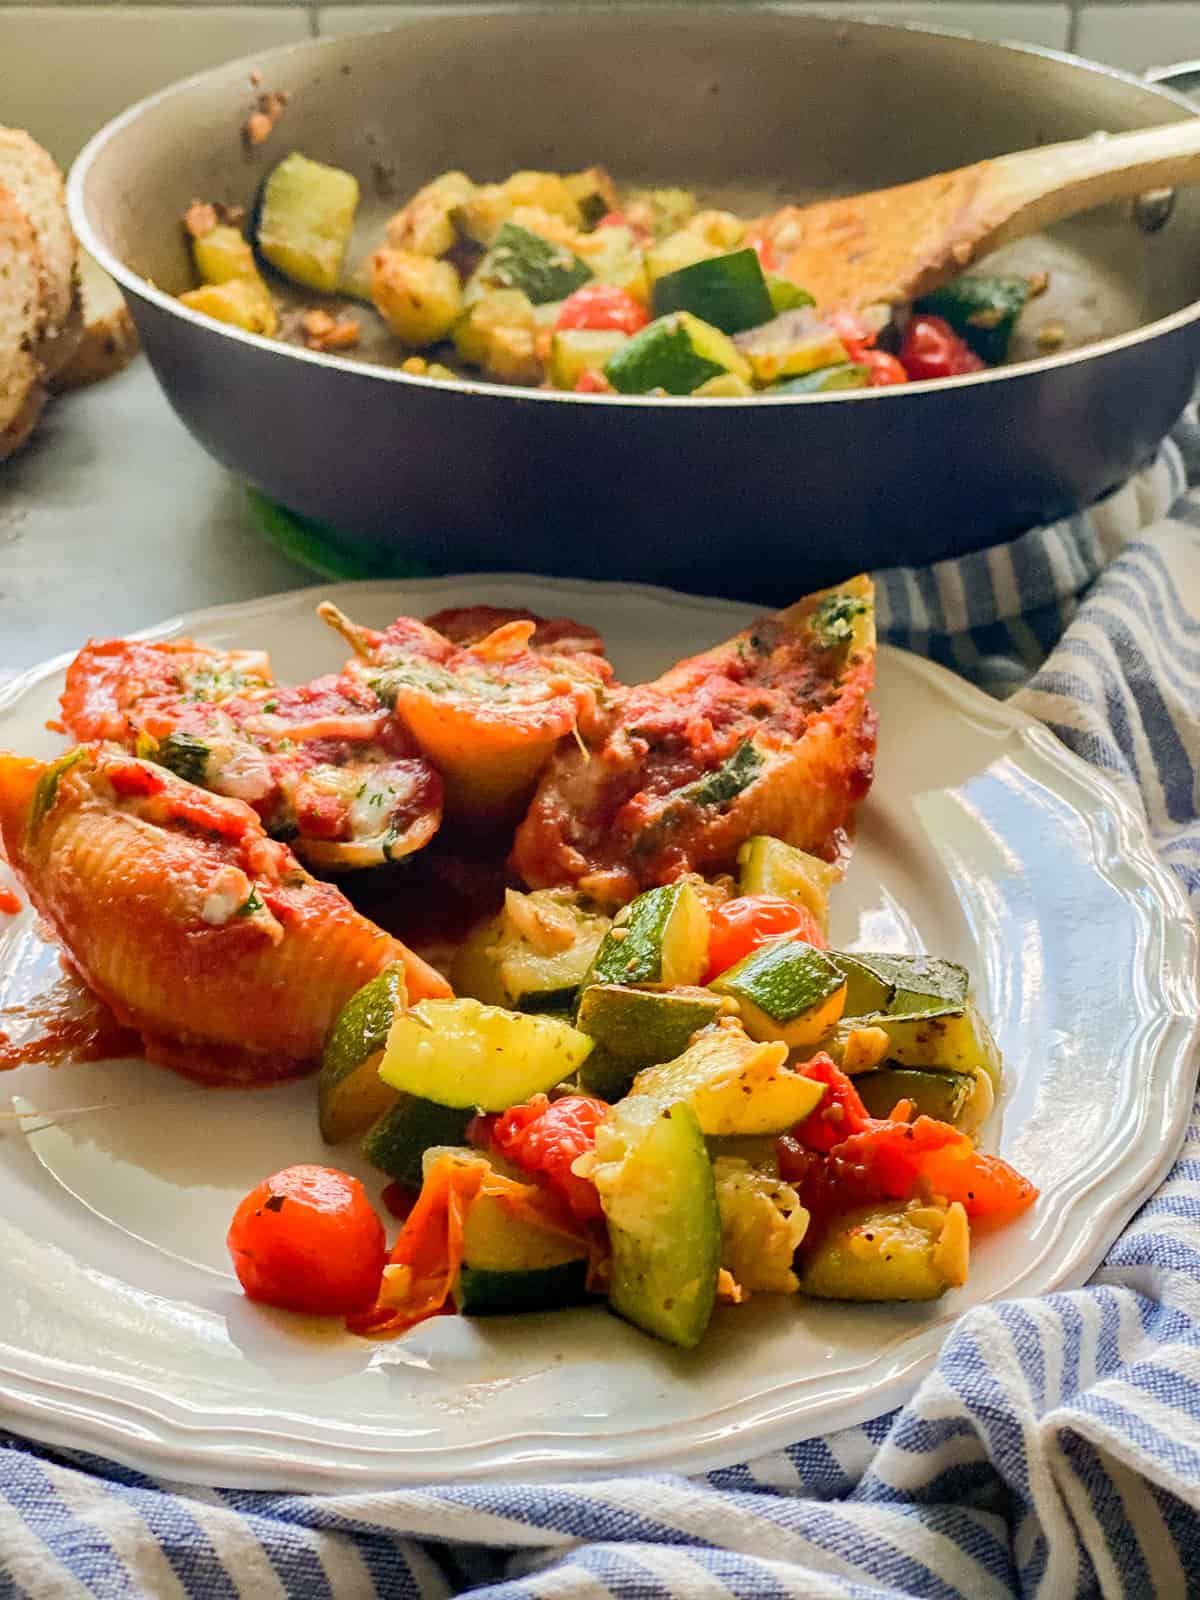 Plate of sautéed zucchini and tomatoes with stuffed shells, with a pan of more diced zucchini and tomatoes in the background.